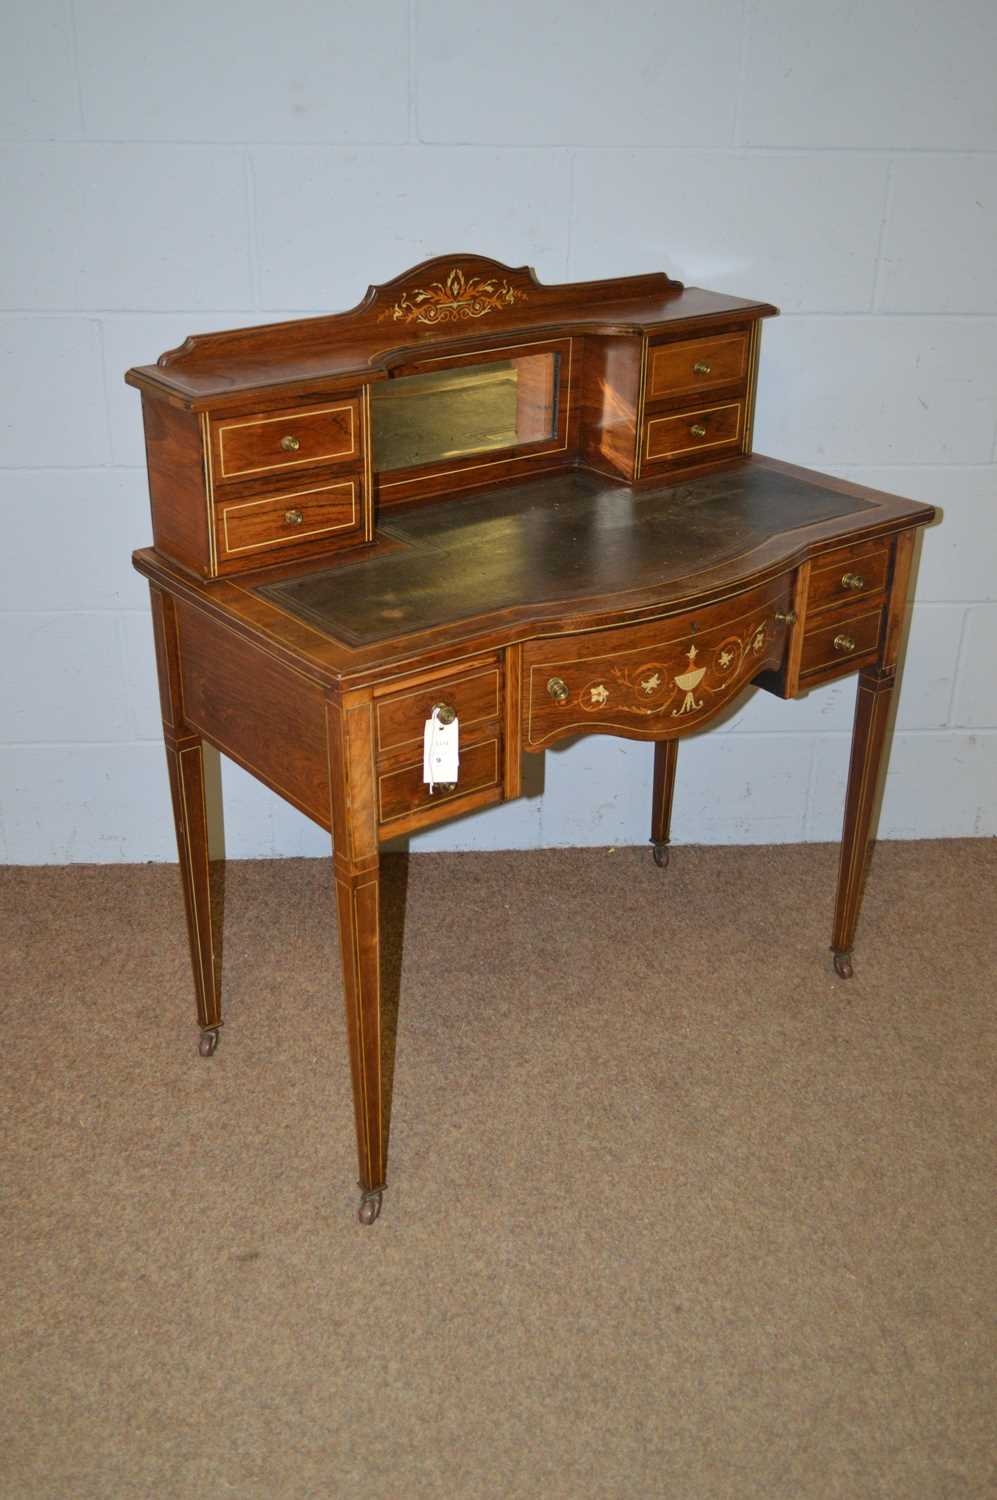 An Edwardian marquetry inlaid rosewood writing desk, by Maple & Co. - Image 3 of 4